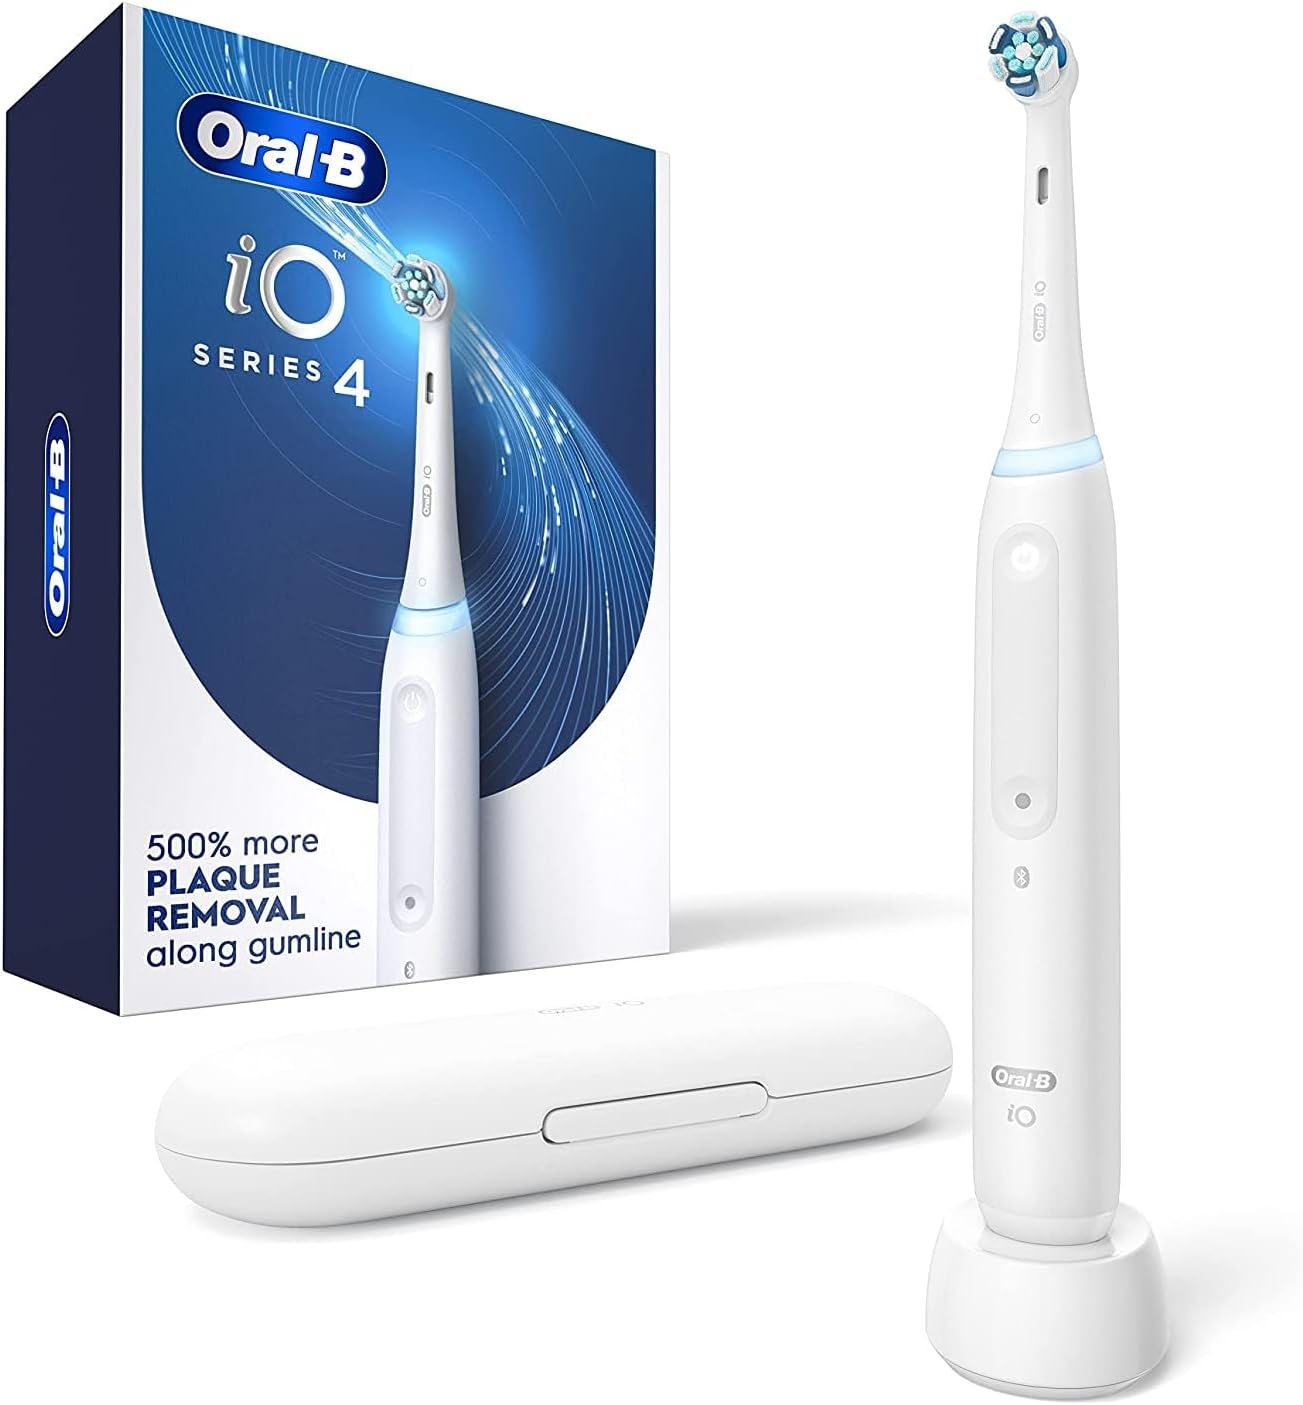 Oral-B iO Series 4 Electric Toothbrush with (1) Brush Head, Rechargeable, White   price checker   price checker Description